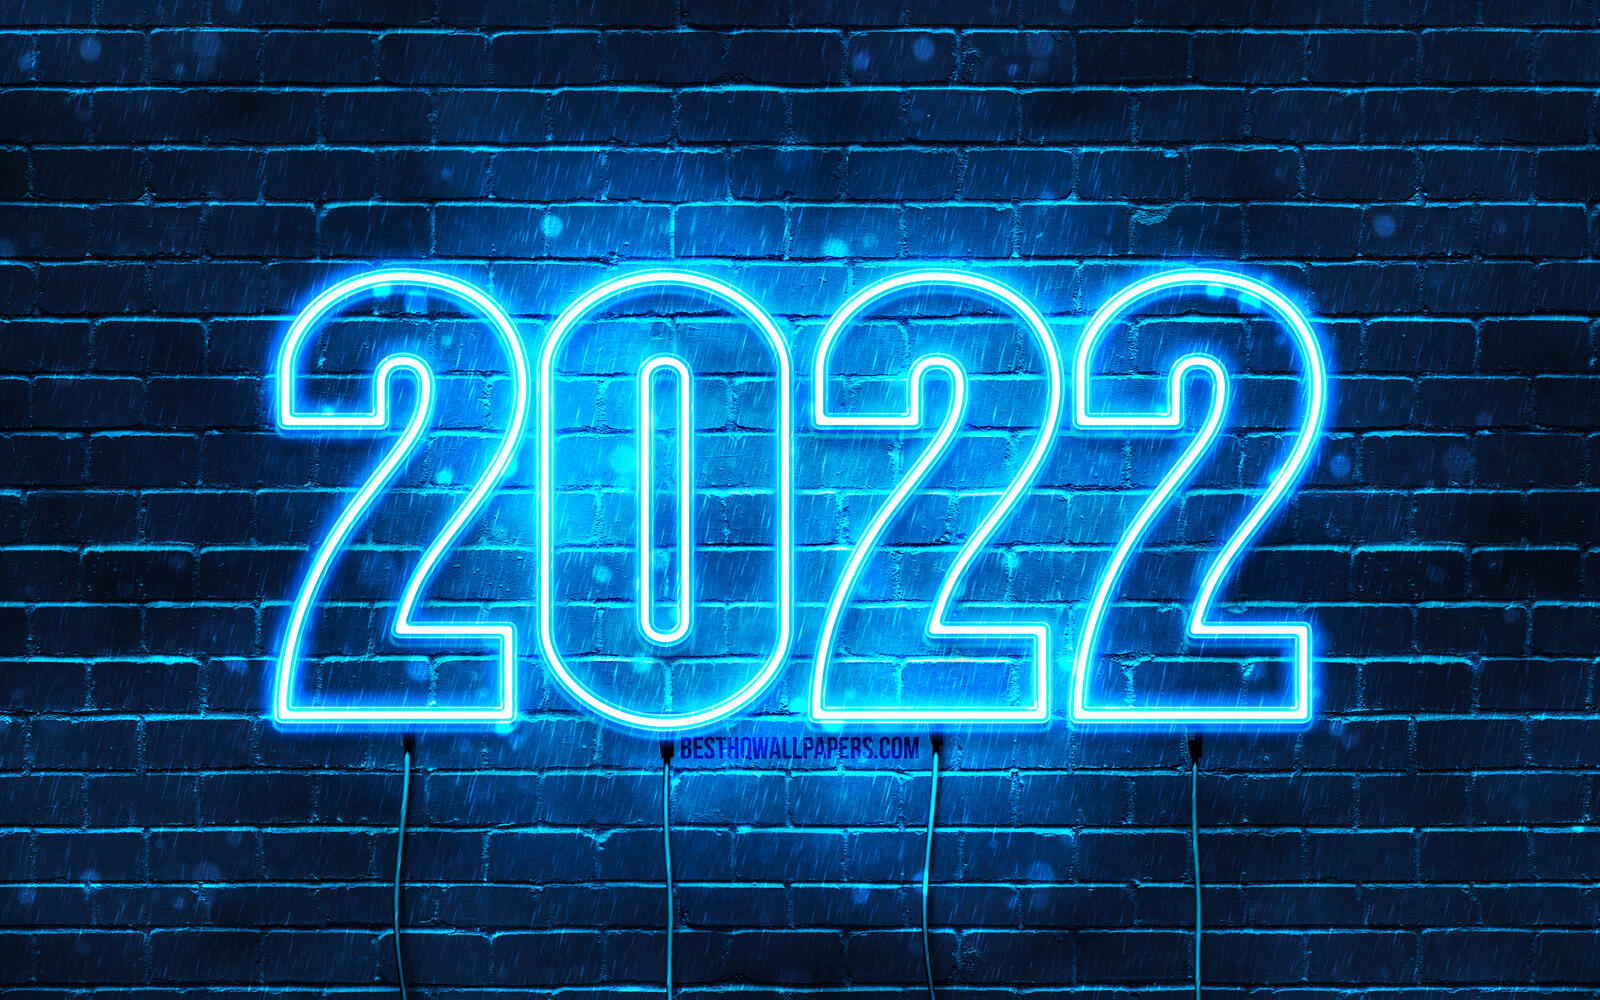 Wallpapers new year 2022 with 2022 happy new year 2022 on the desktop